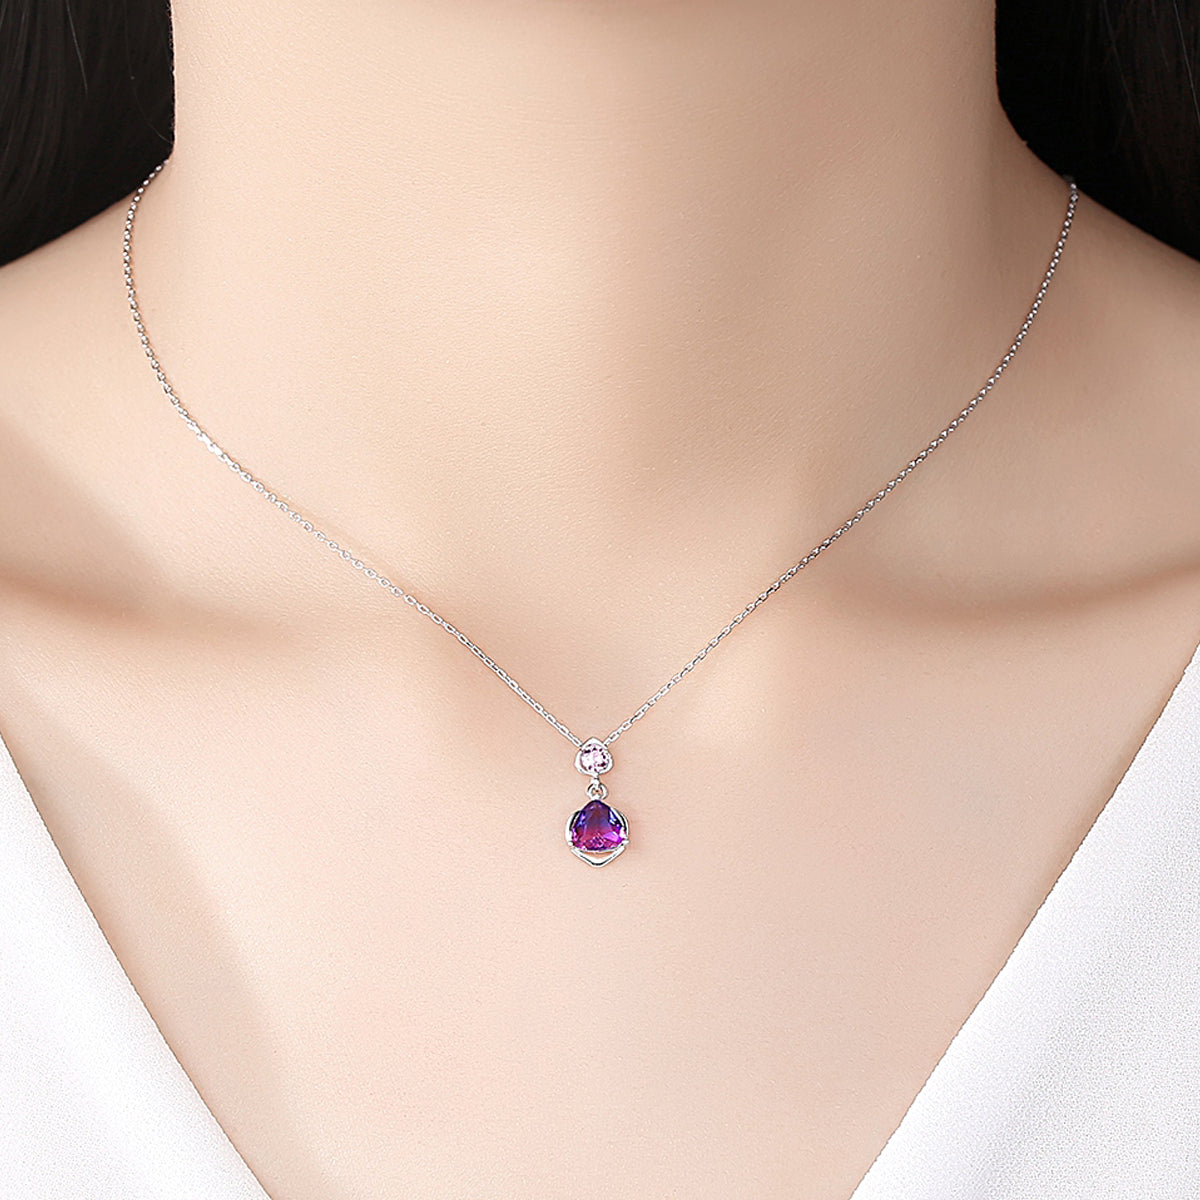 Simulated Mystic Topaz Silver Necklace